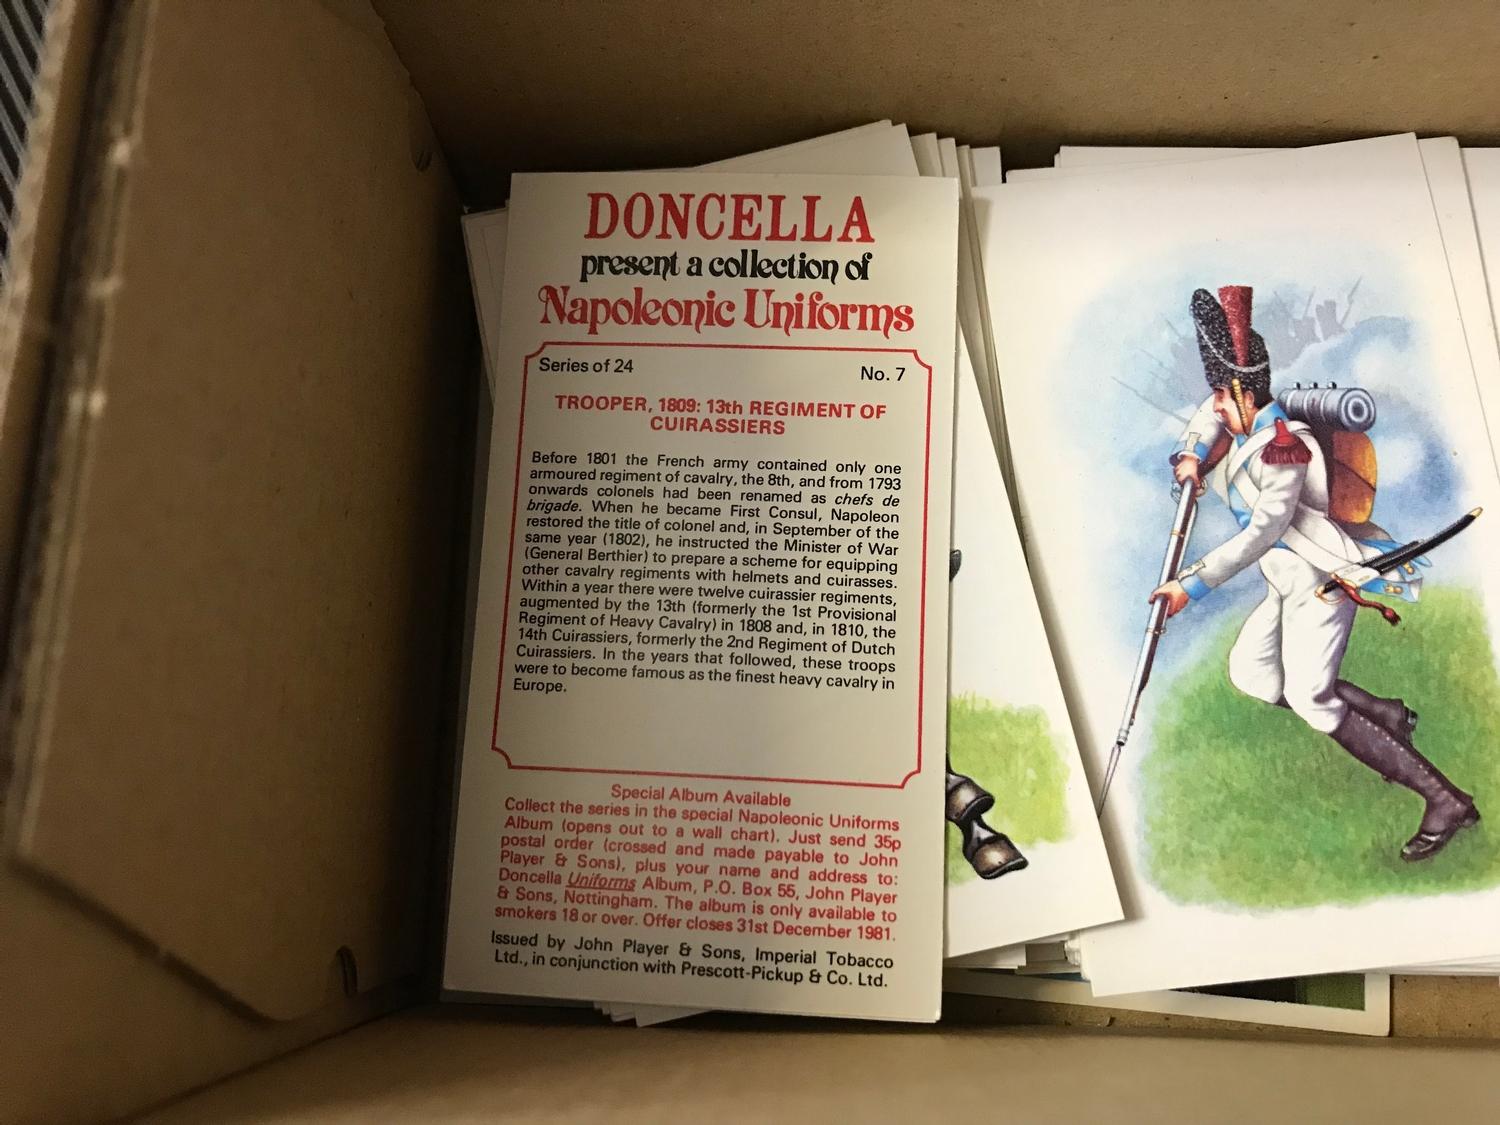 A Box of Doncella Napoleonic Uniforms Cigarette Cards by John Player & Sons - Image 2 of 2